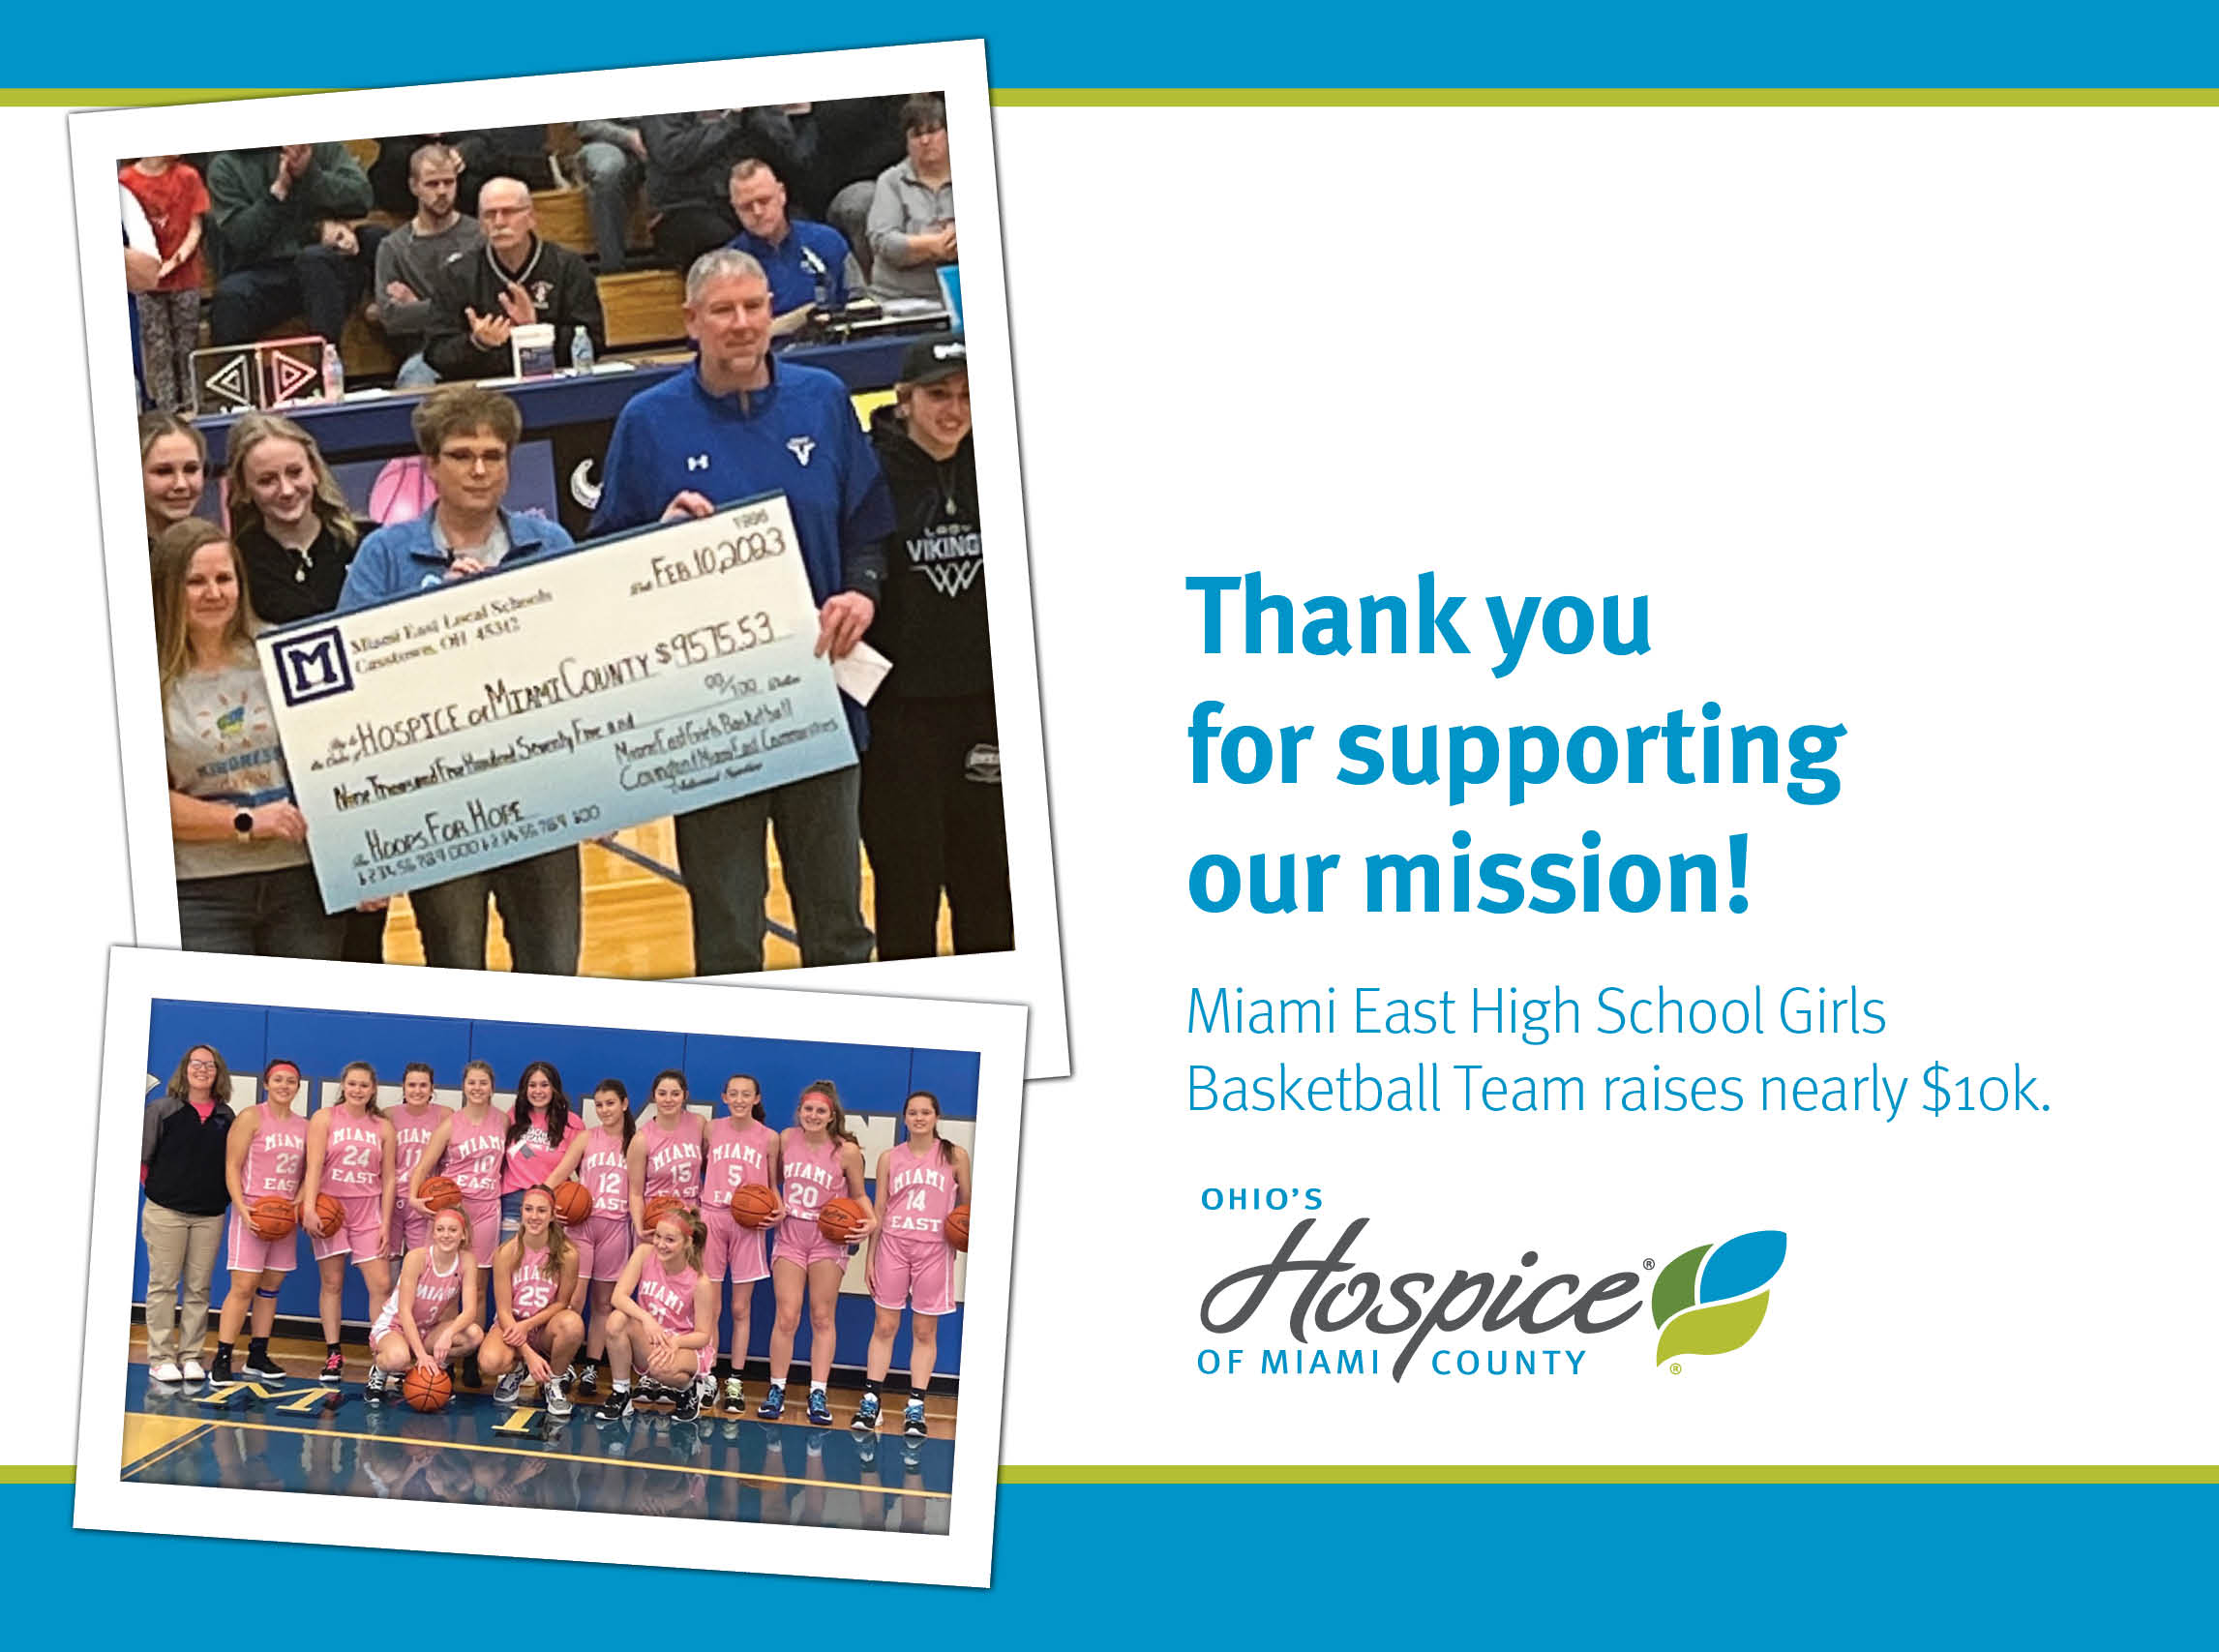 Thank you for supporting our mission! Miami East High School Girls Basketball Team raises nearly $10k. Ohio's Hospice of Miami County